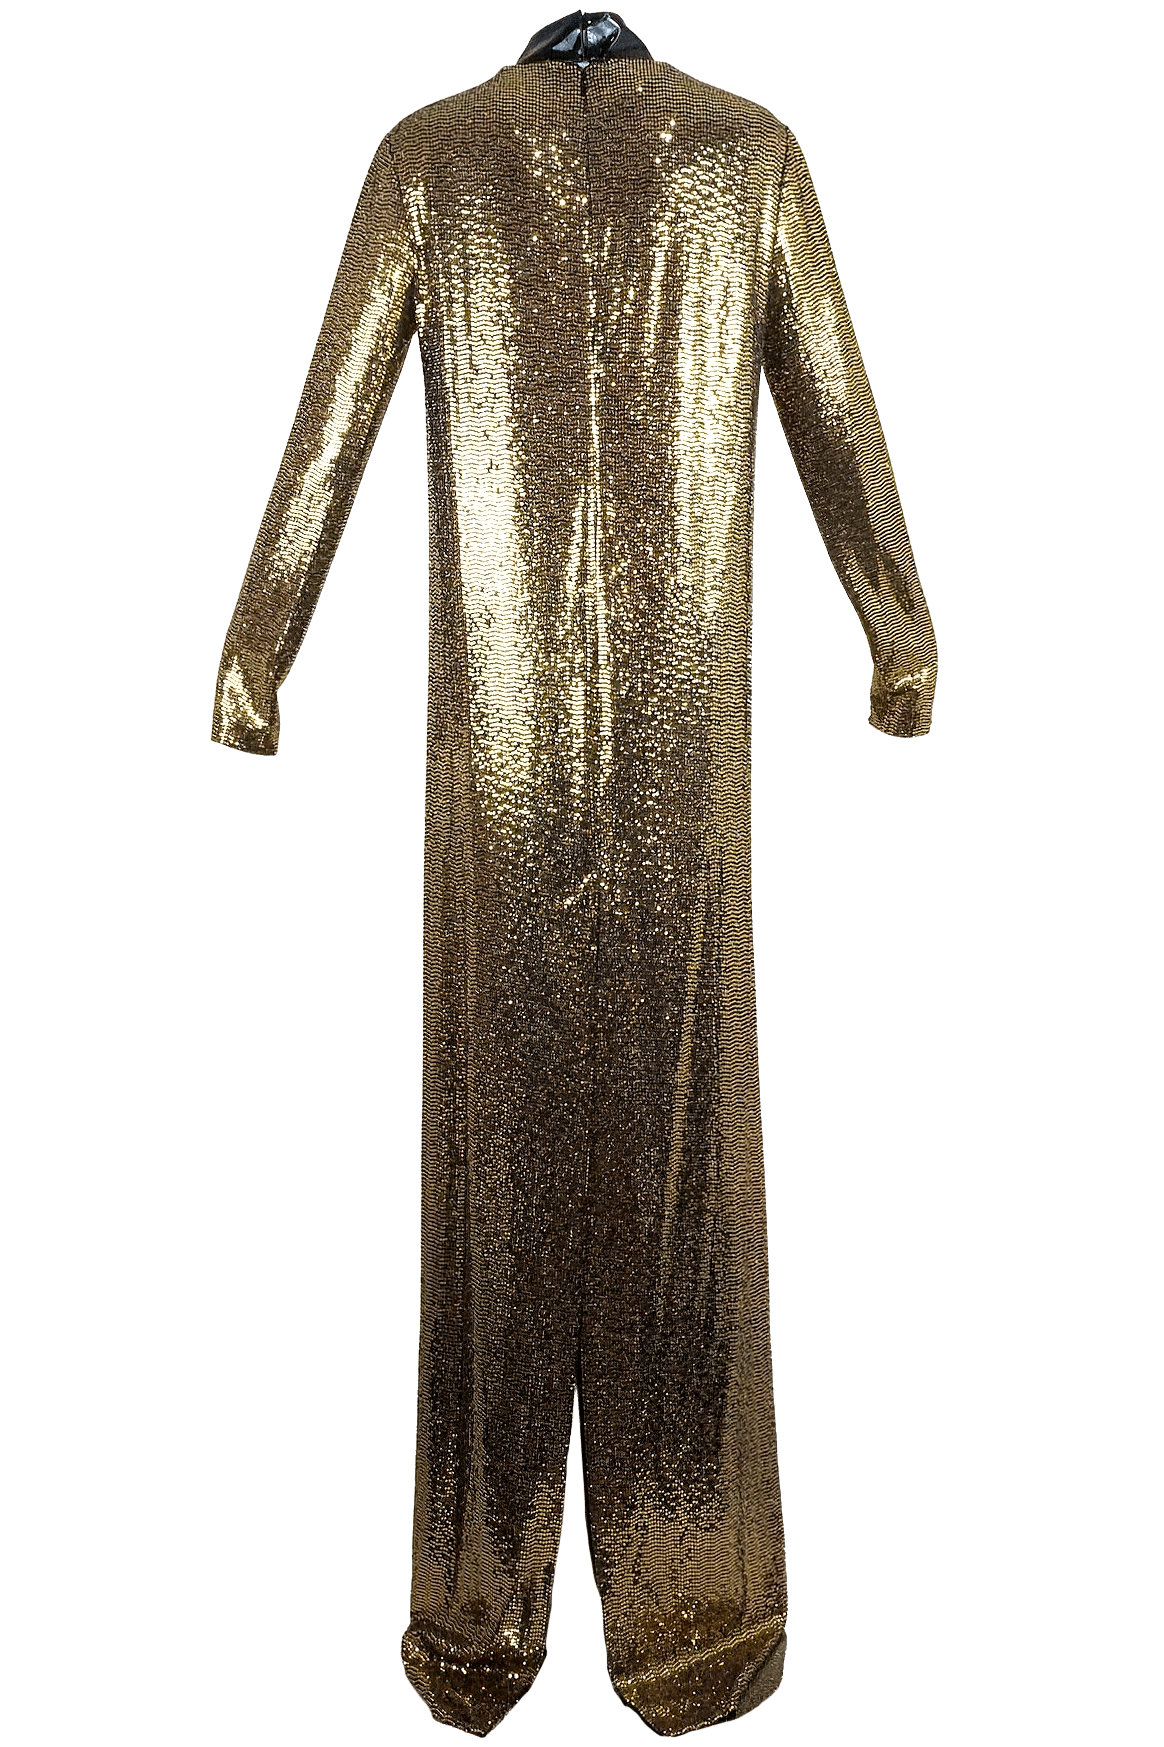 Gucci Snakeskin Pattern Laminated Gold Gown w/Patent Leather Choker - Foxy Couture Carmel